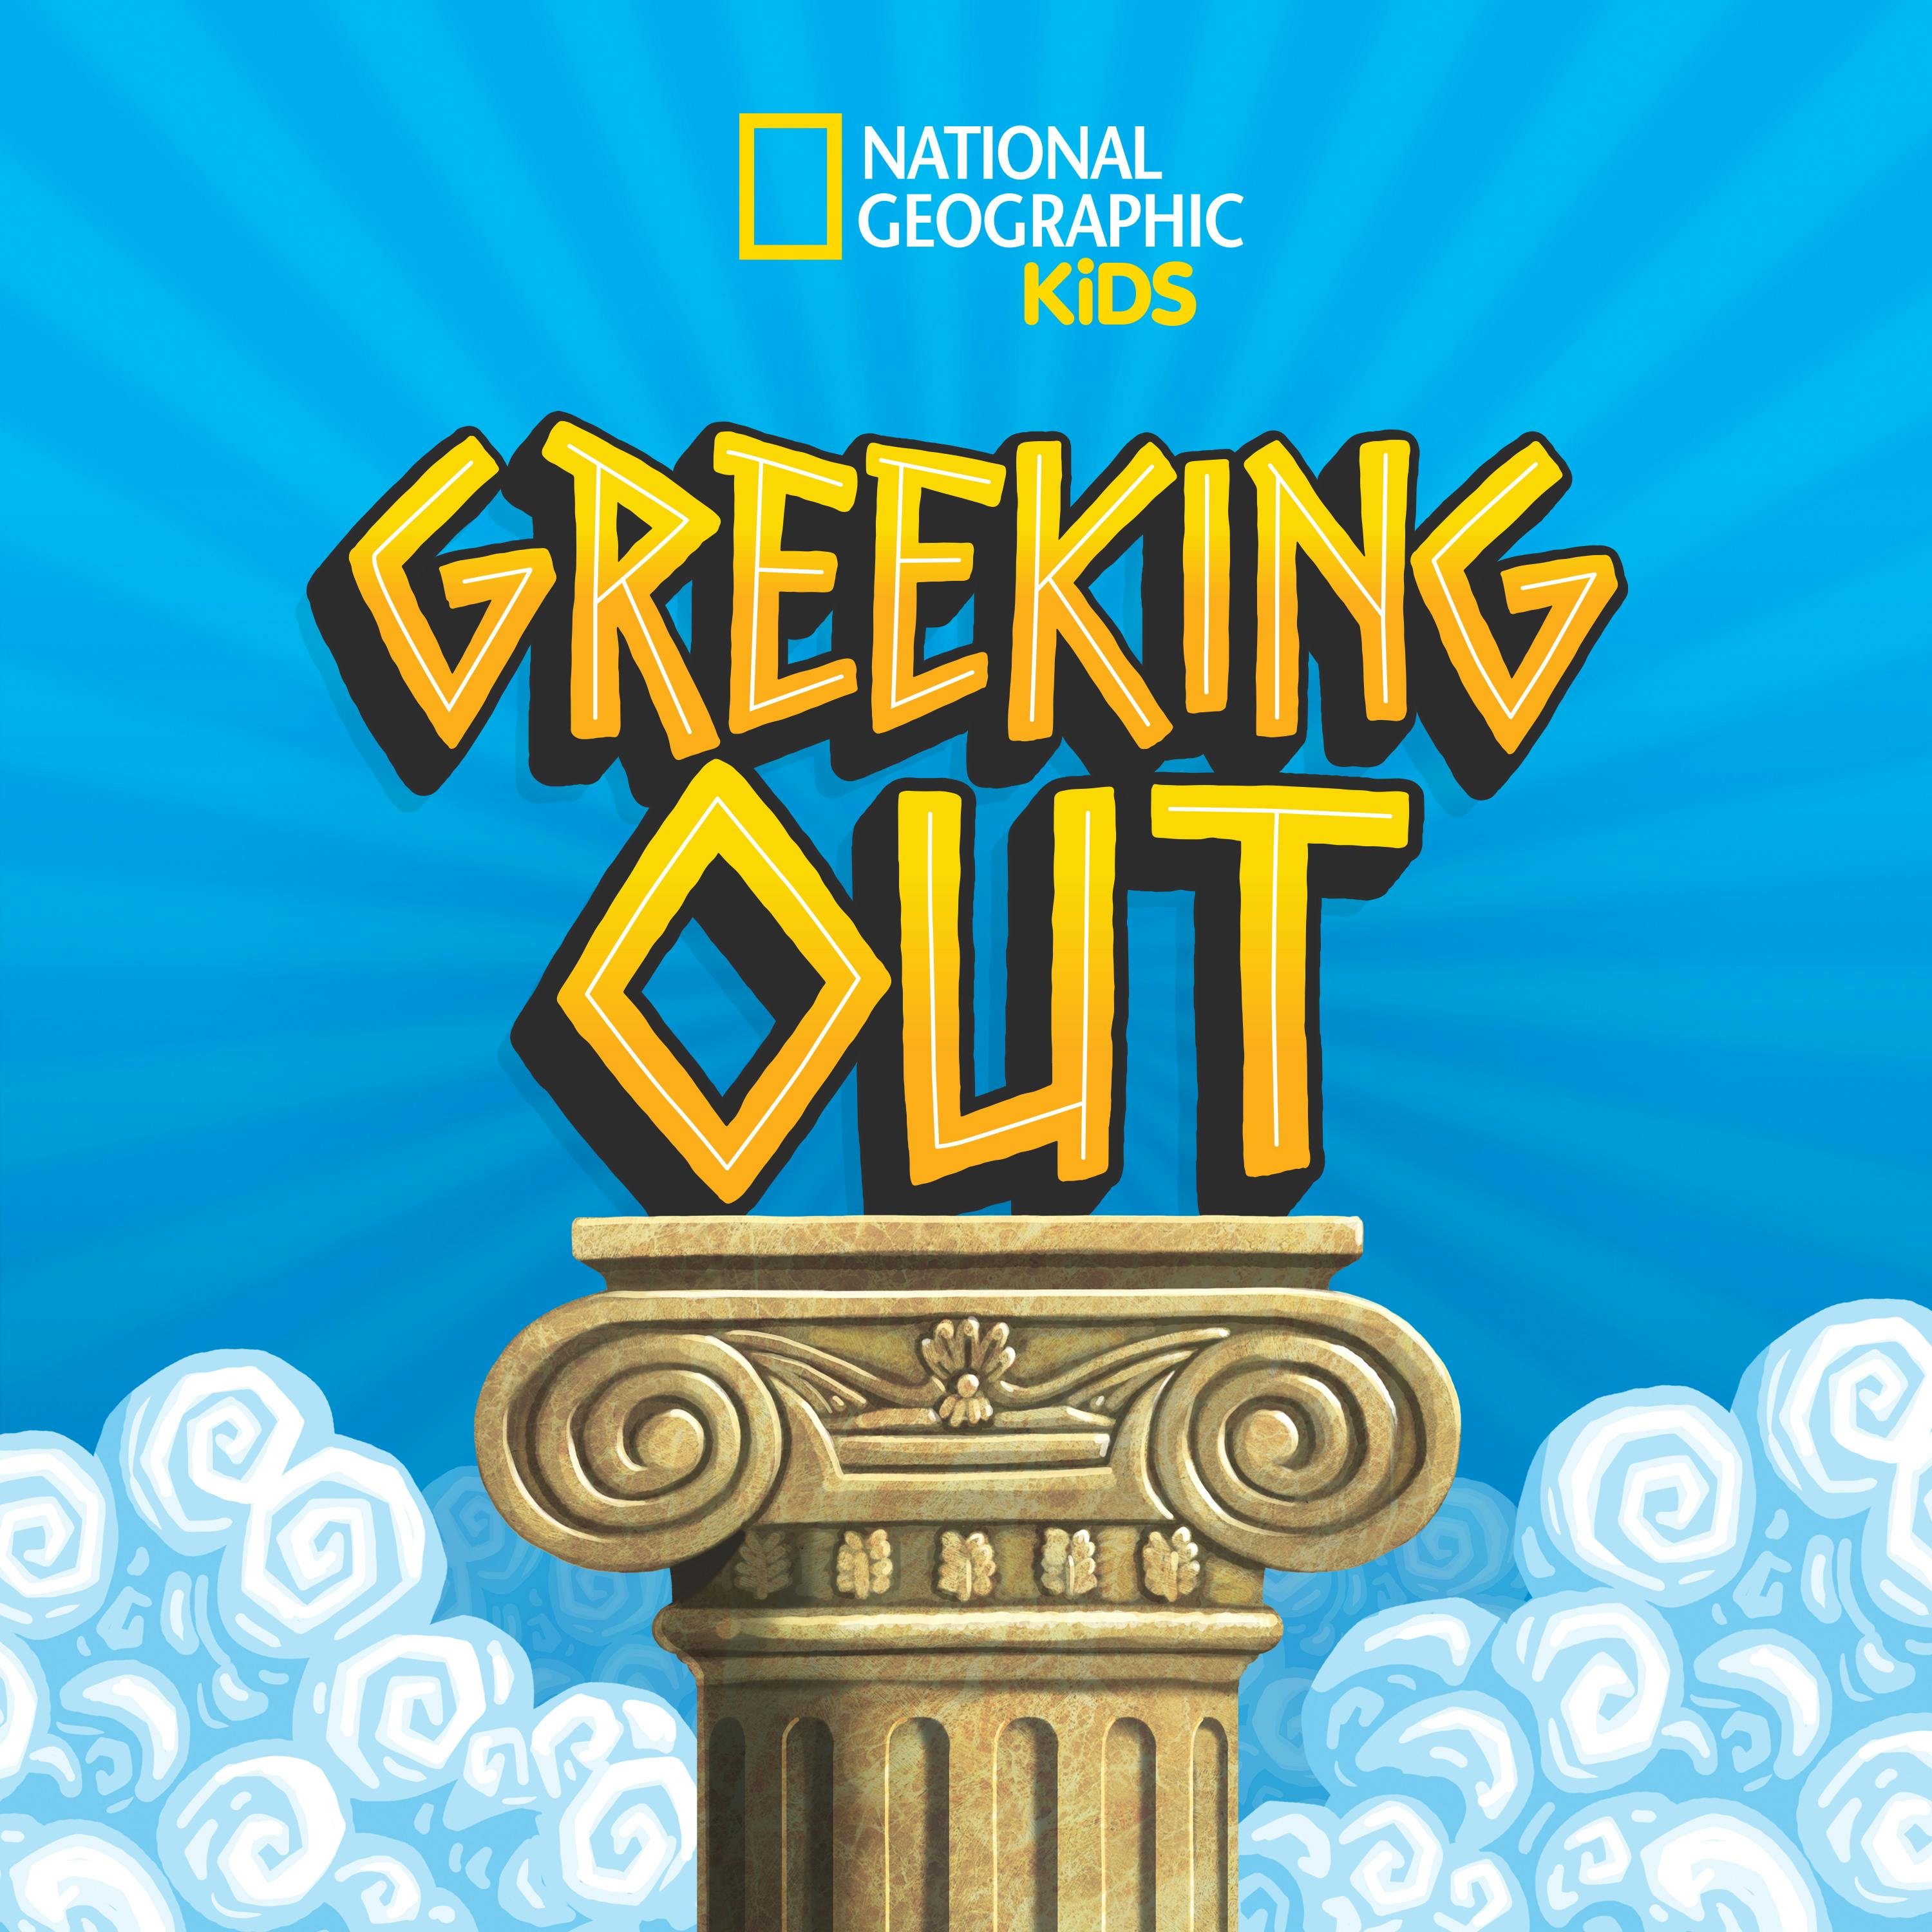 Greeking Out from National Geographic Kids podcast